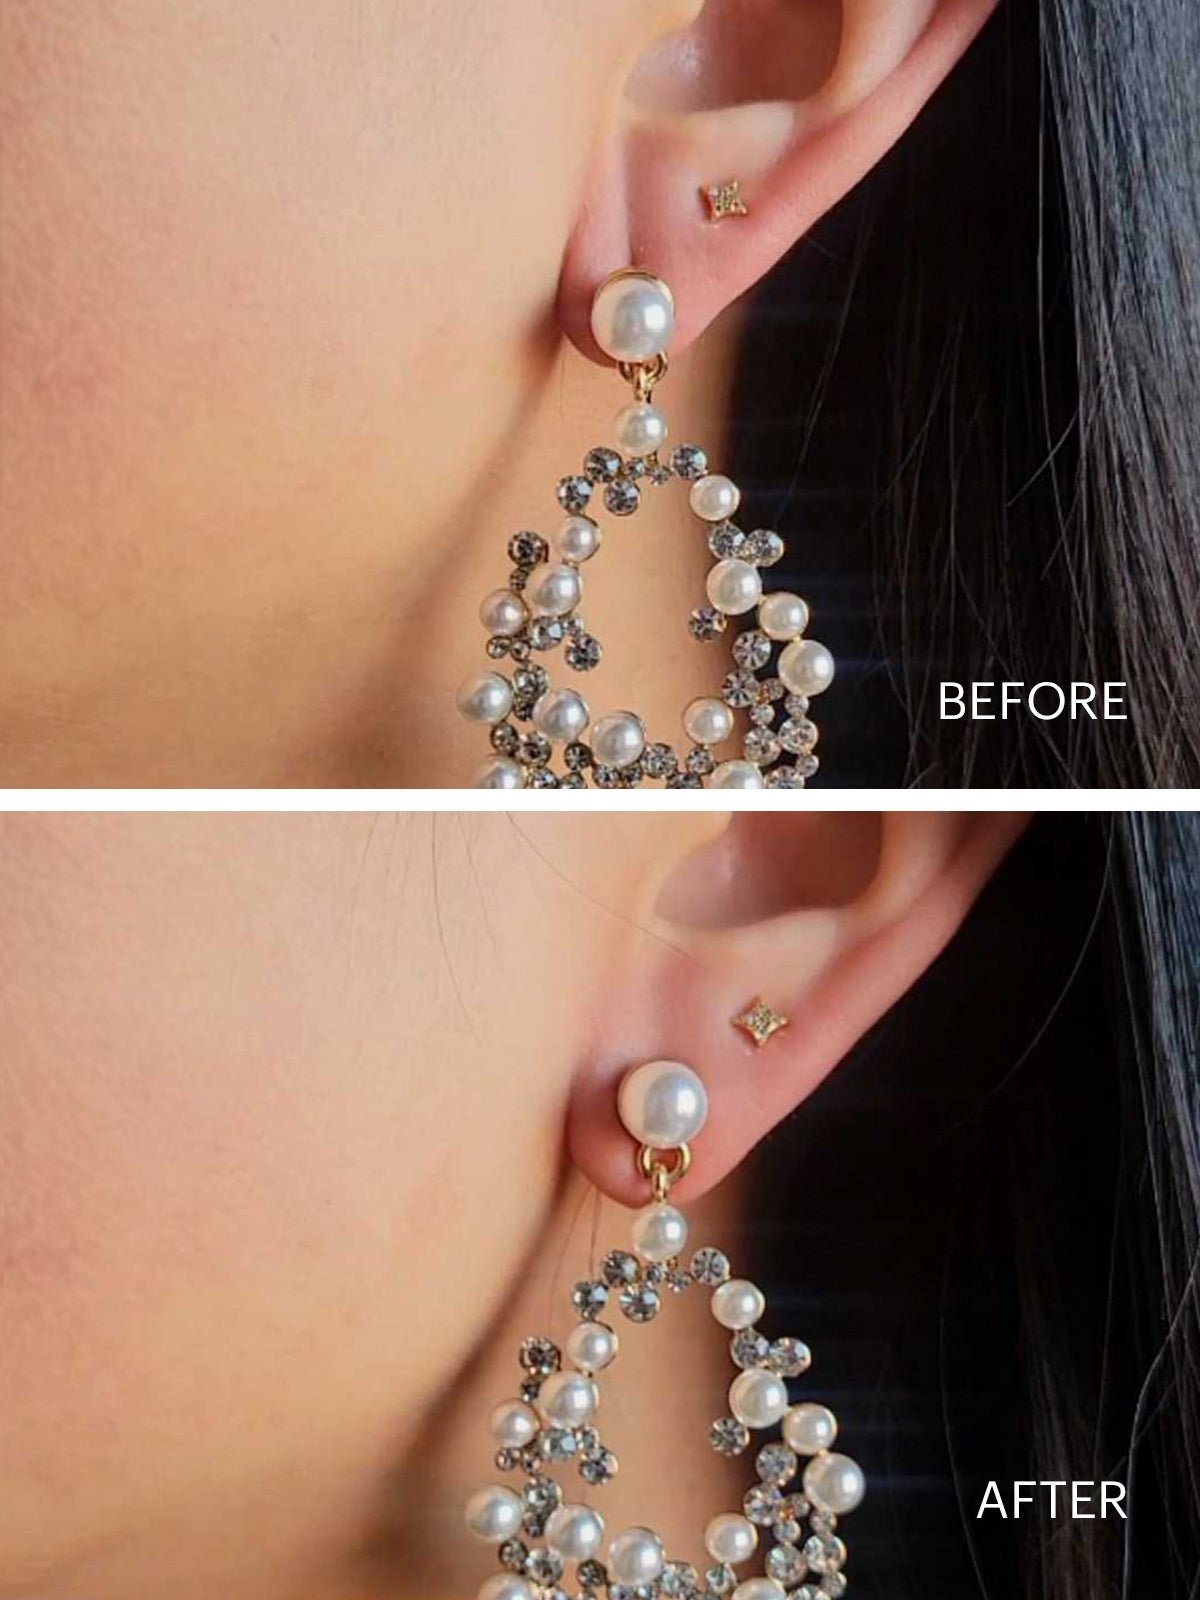  Lobe Miracle Plus - Clear Earring Support Patches